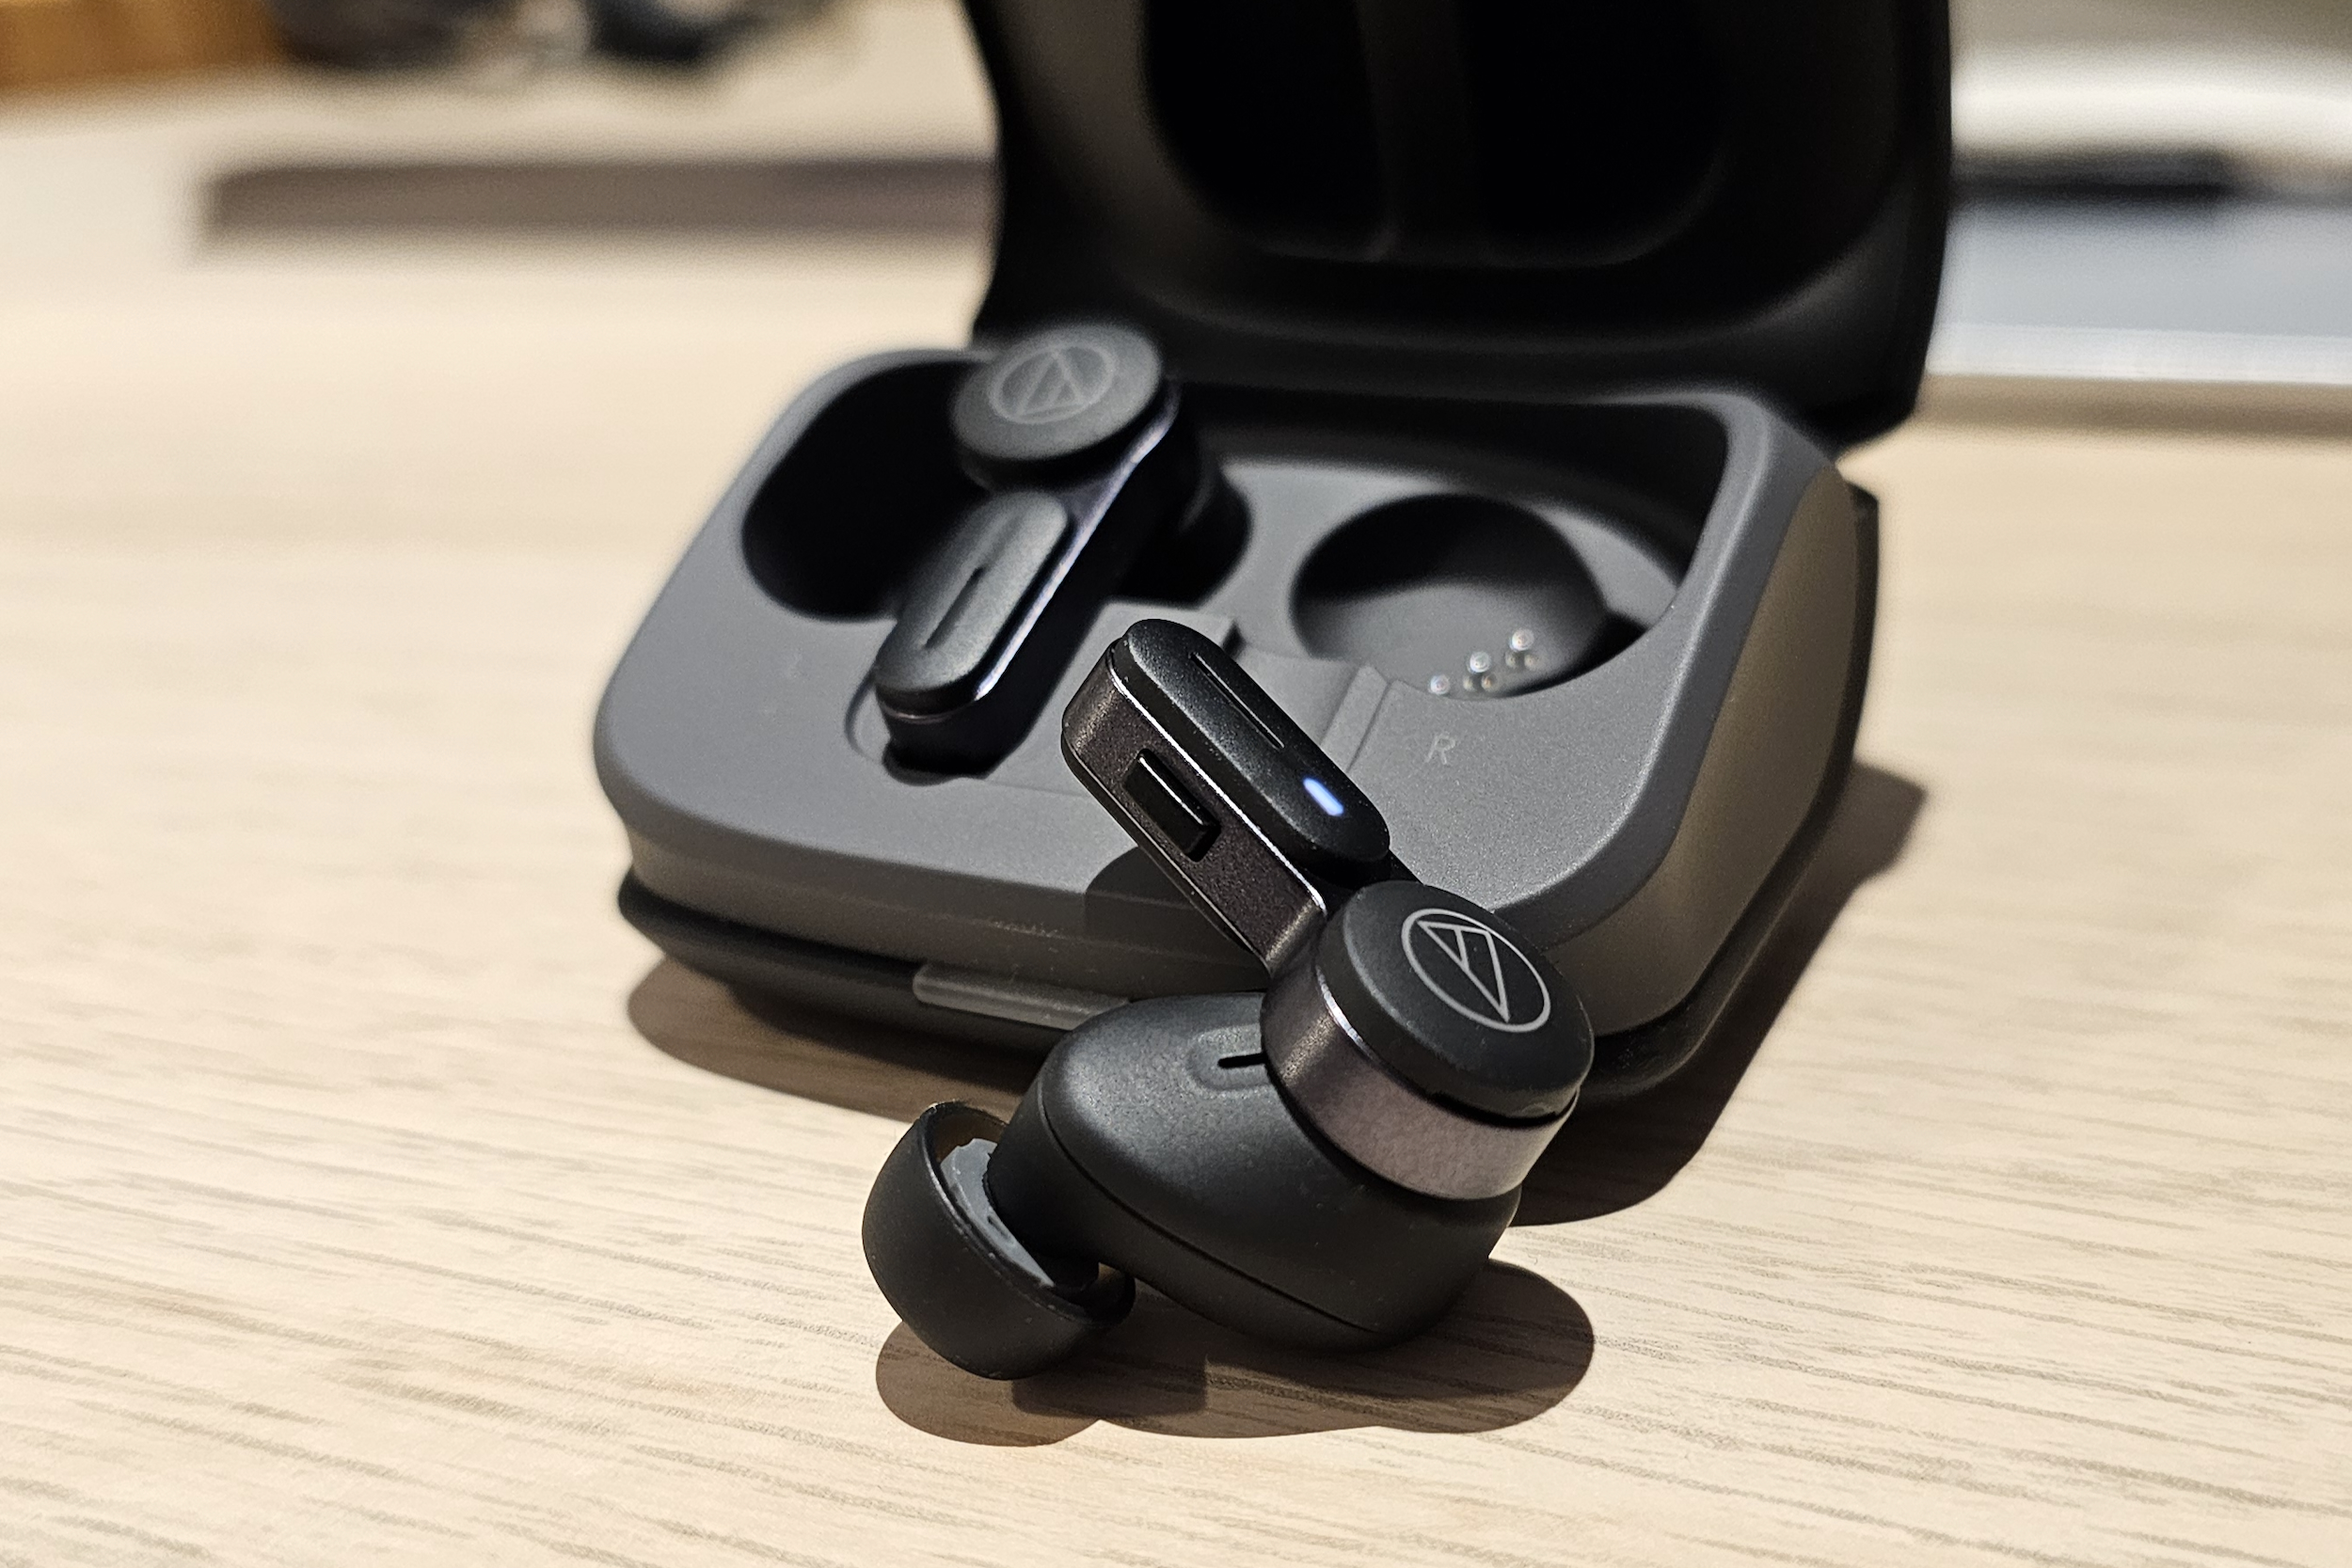 Audio-Technica ATH-TWX7 right earbud in front of case.